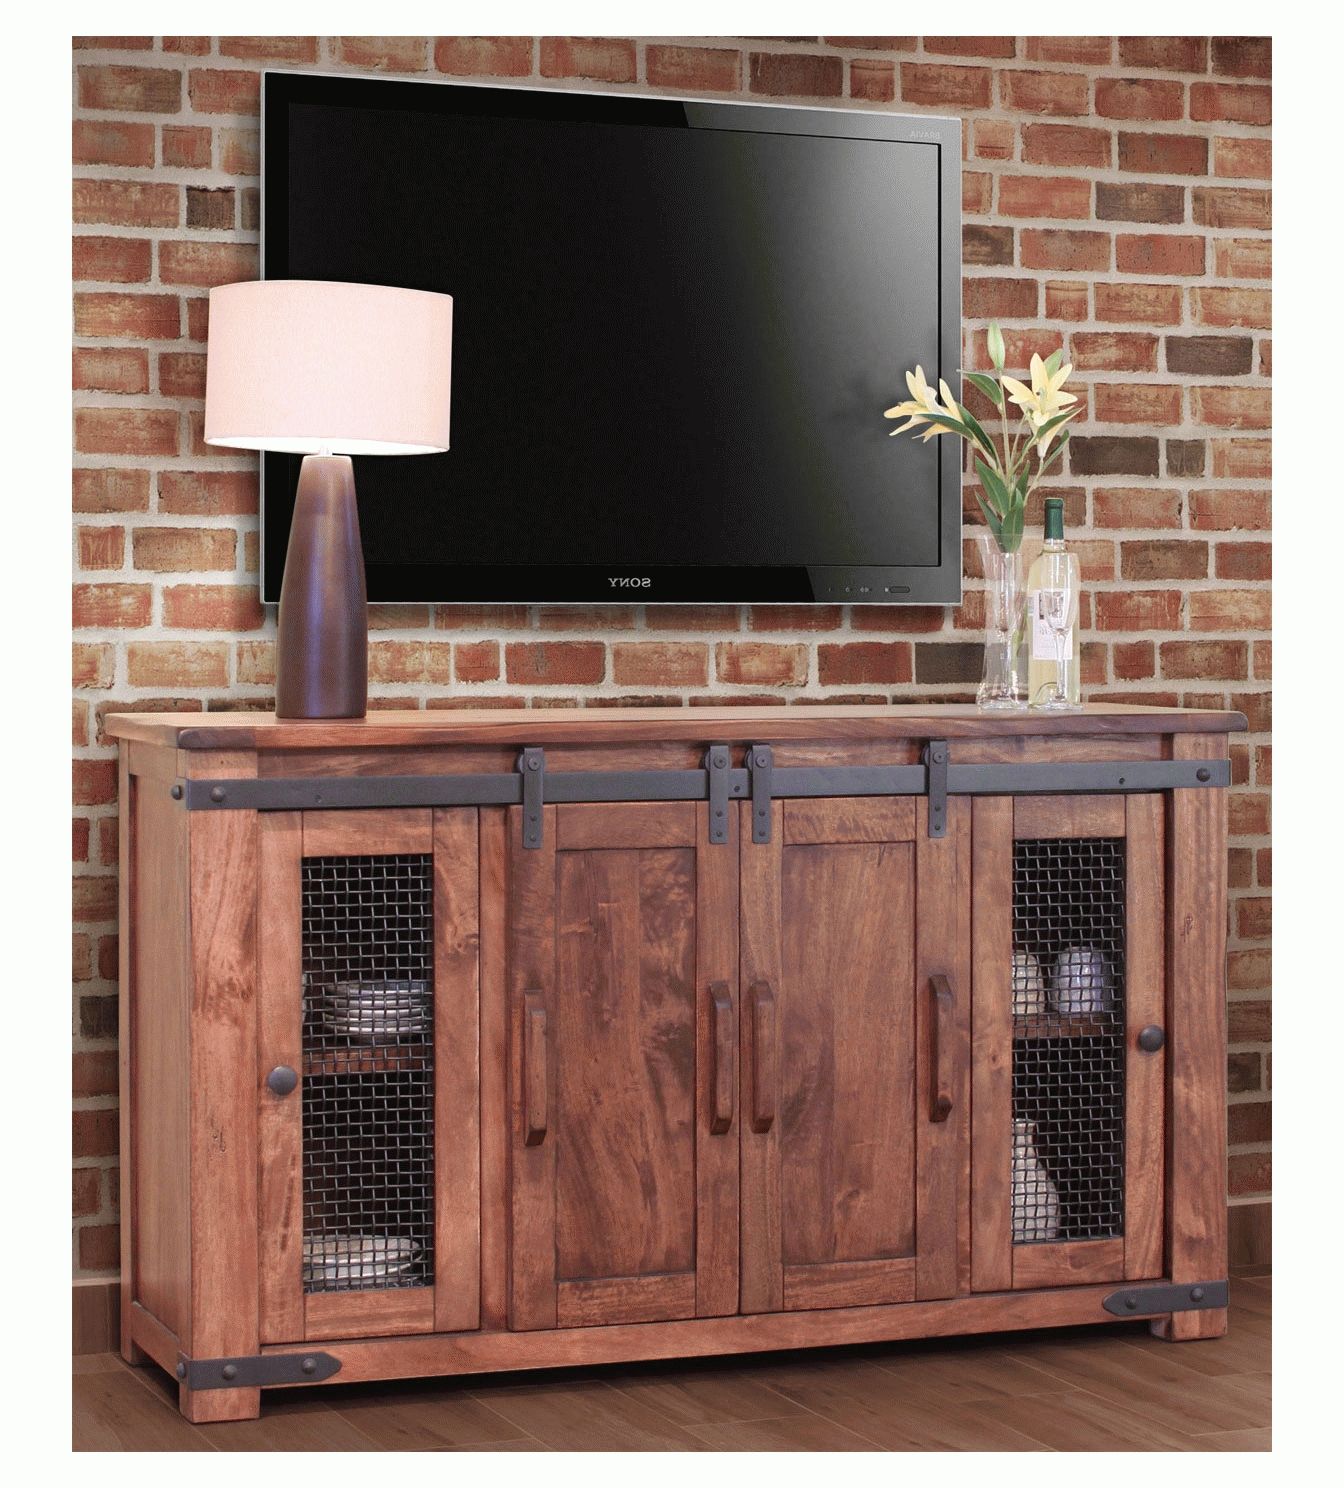 Rustic Tv Stand, Wood Tv Stand, Pine Tv Stand Regarding Pine Wood Tv Stands (View 4 of 15)